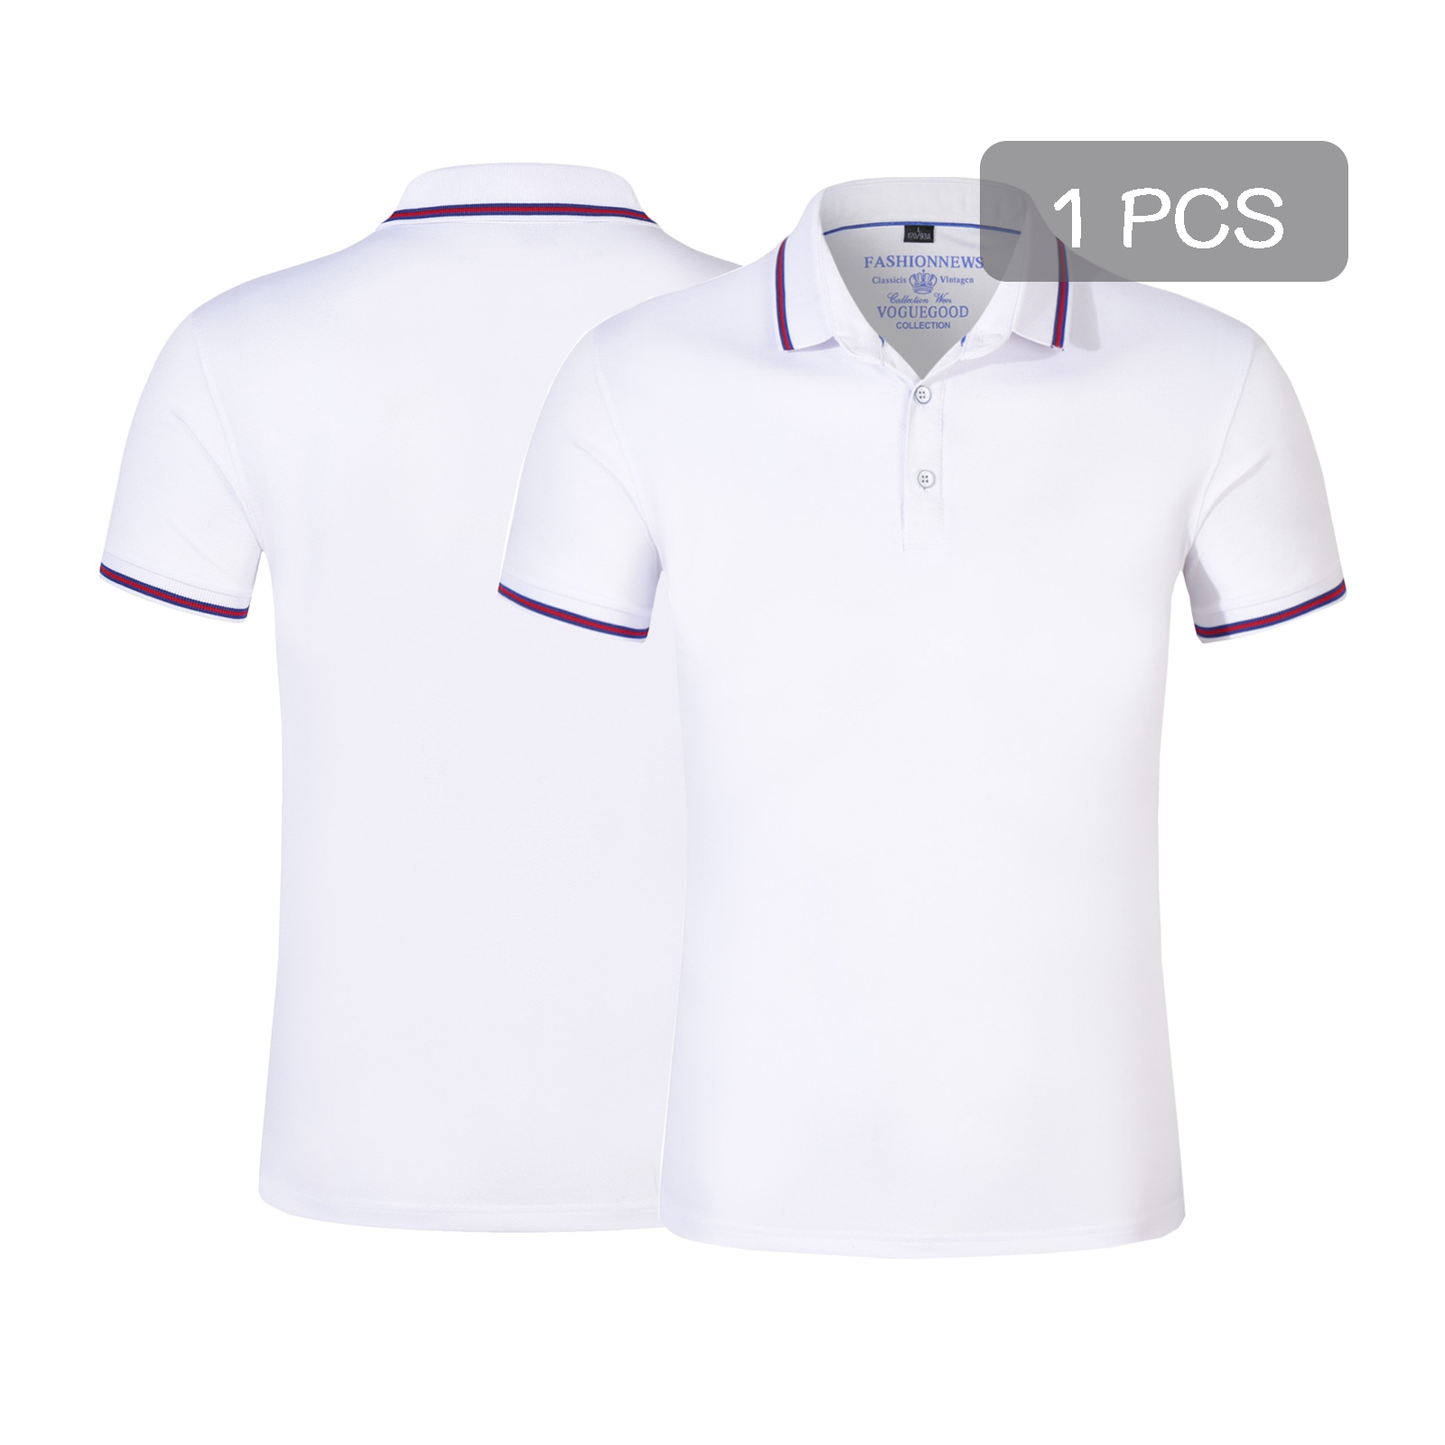 Custom Polo T Shirt with LOGO Design You Own Short Sleeved Shirt Dri Fit Workwear for Work,Business